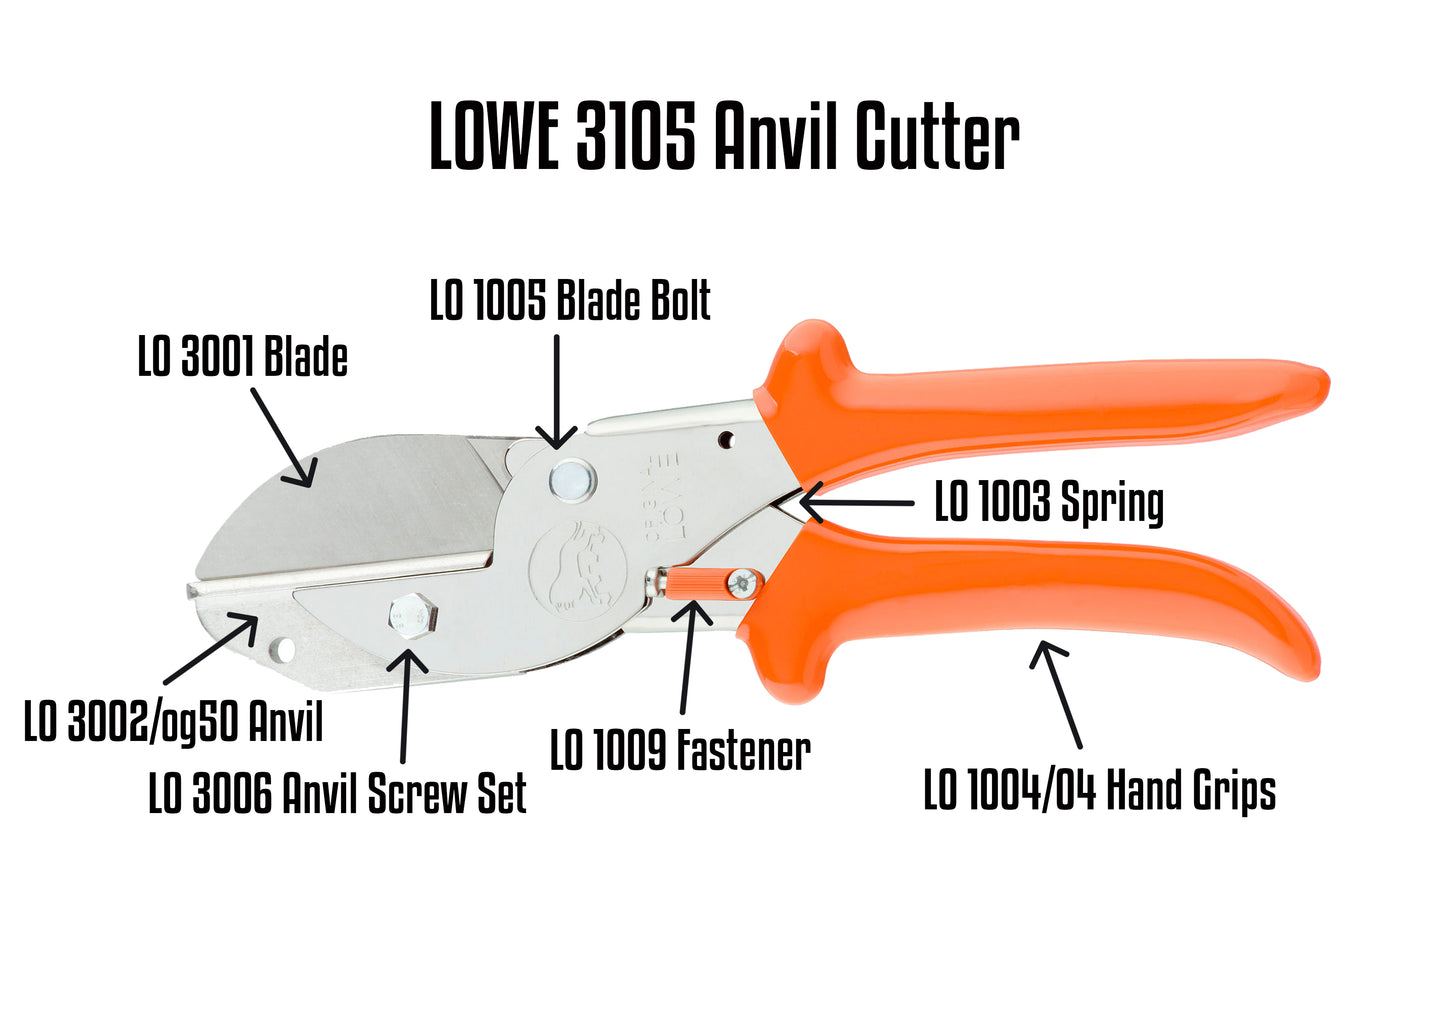 Lowe 3105 Parts Guide